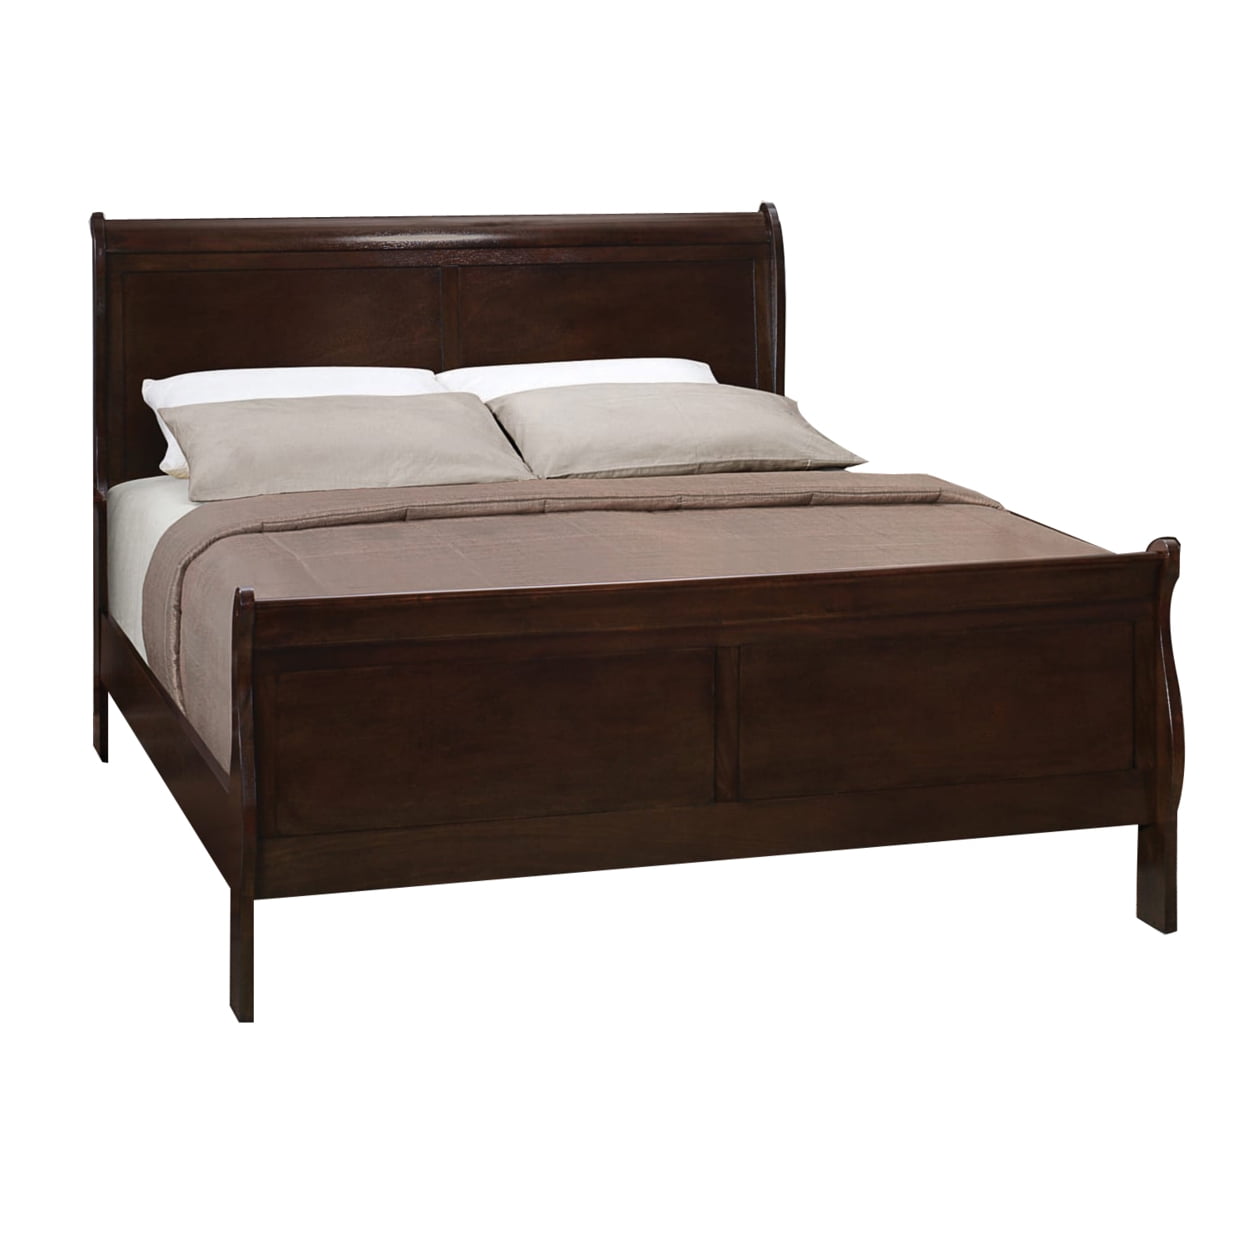 BM208177 Traditional Style Wooden Queen Size Bed with Curved Headboard, Brown -  Benzara